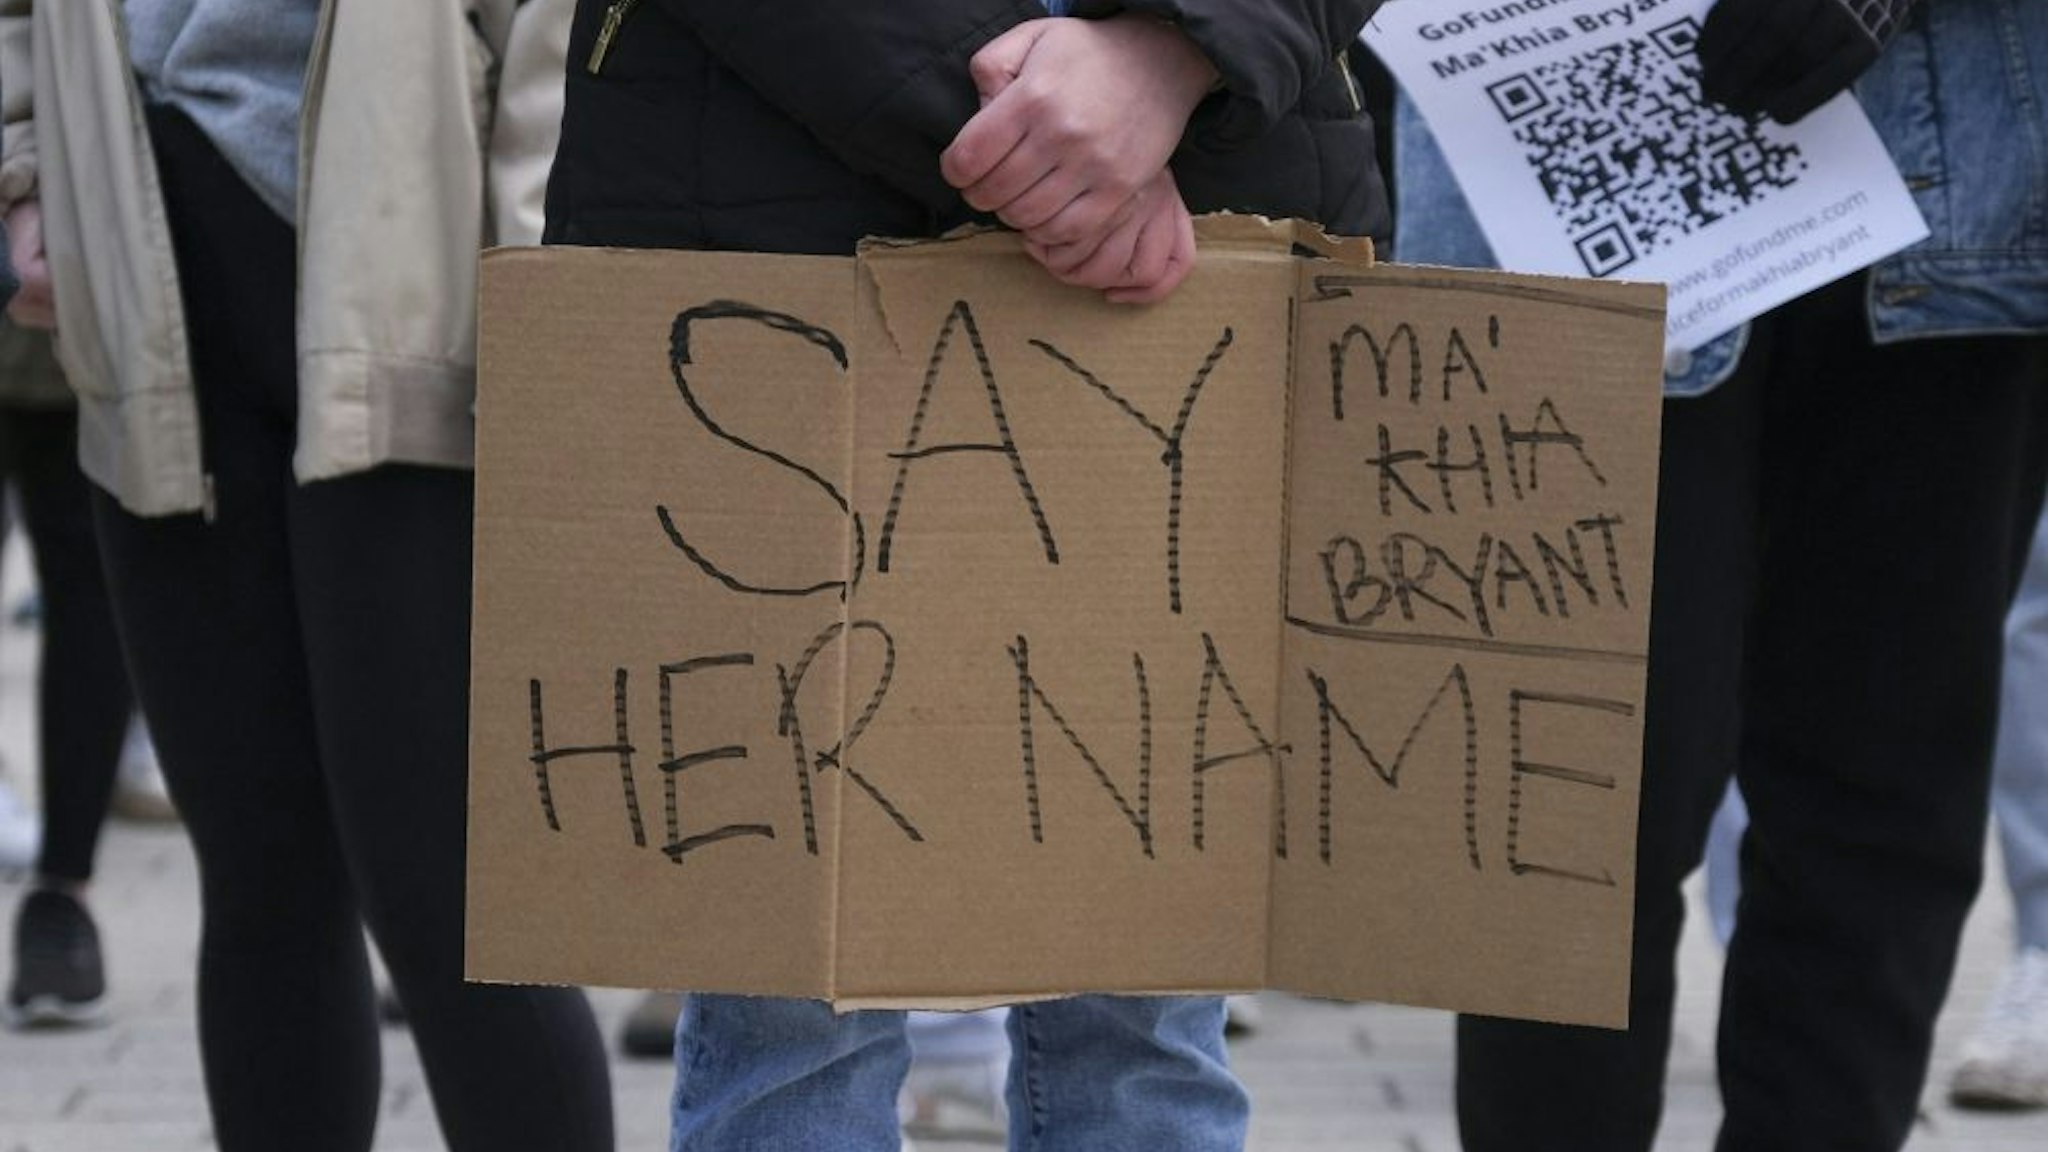 A supporter holds a sign during a staged sit-in at the Ohio Union building on the campus of The Ohio State University in Columbus, Ohio on Wednesday, April 21, 2021 to protest the killing of MaKhia Bryant, 16, by the Columbus Police Department. - Police in the US state of Ohio fatally shot a Black teenager who appeared to be lunging at another person with a knife, less than an hour before former officer Derek Chauvin was convicted of murdering George Floyd. The shooting occurred at a tense time with growing outrage against racial injustice and police brutality in the United States, and set off protests in the city of Columbus.